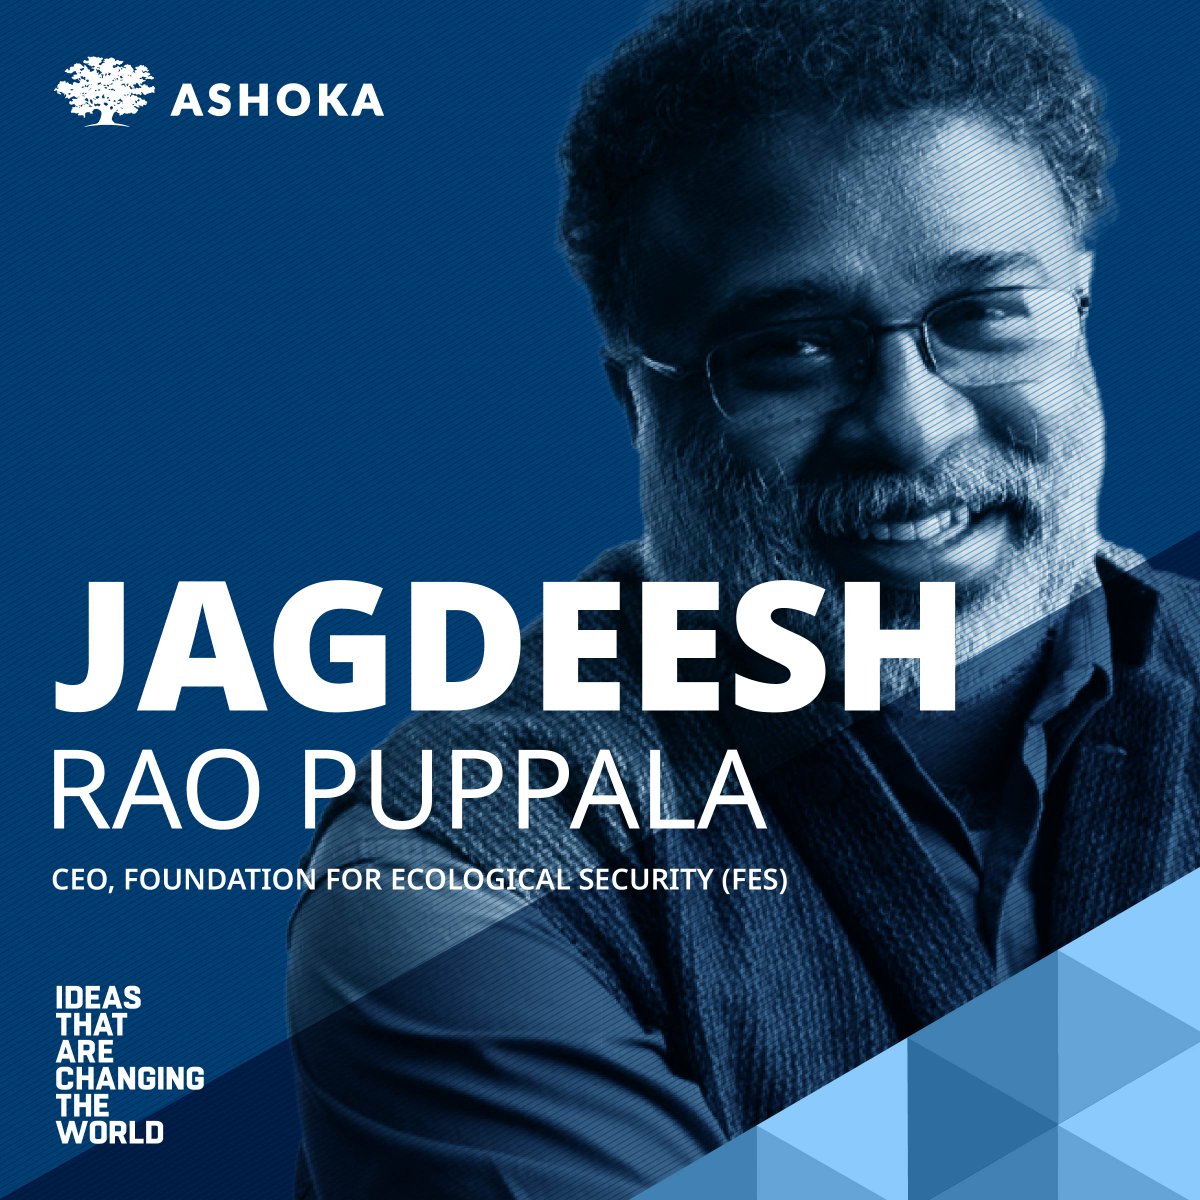 How do we end the “tragedy of commons”? Meet #AshokaFellow Jagdeesh Rao Puppala. He works with village communities in India to productively use natural resources in a manner that restores the ecosystem. 🌱

More in Ashoka’s #2022LeadingSocialEntrepreneurs: ow.ly/kZqH50O43X3